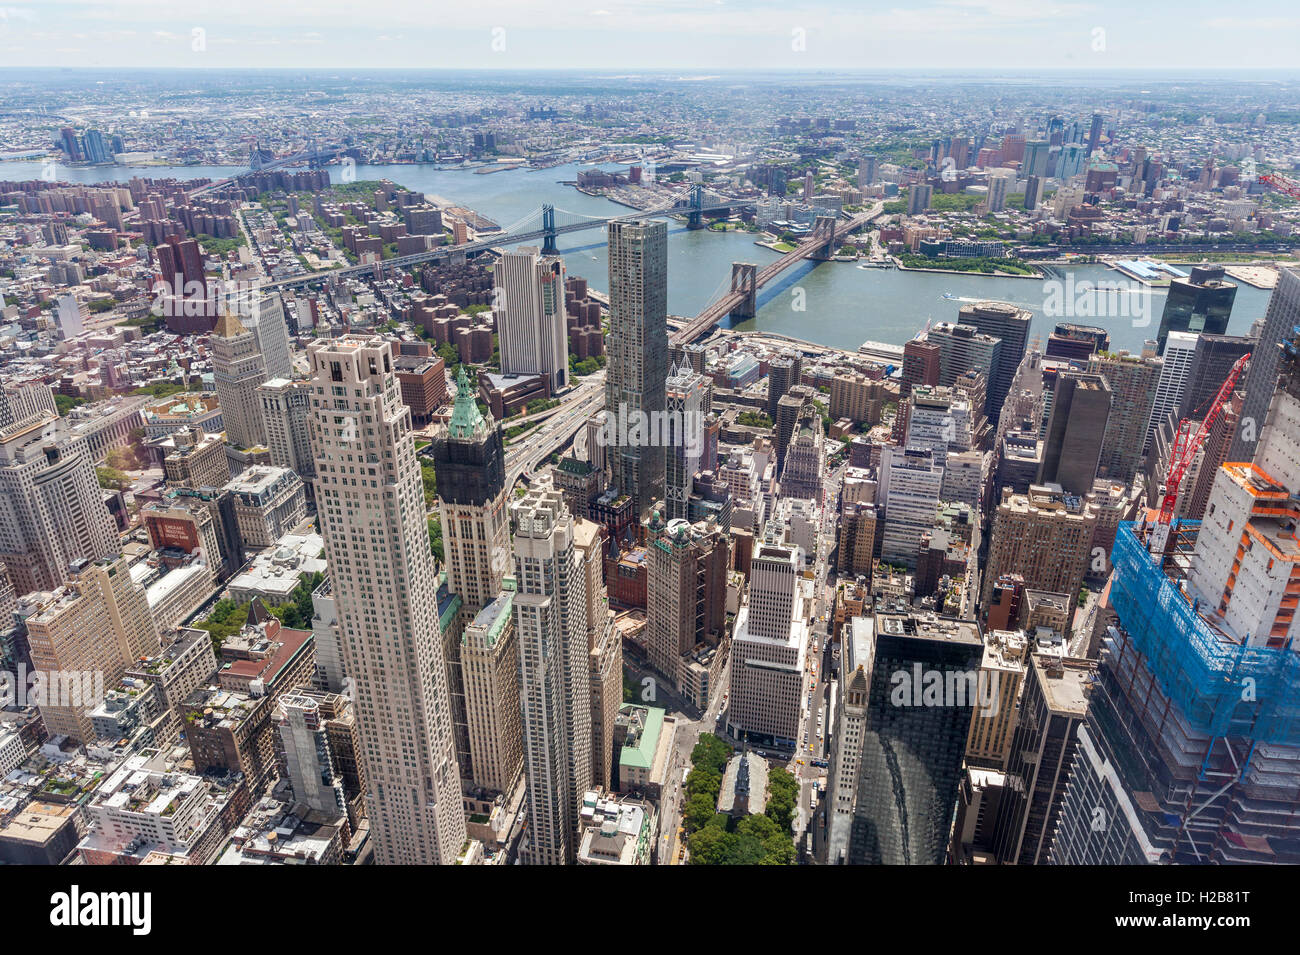 An aerial view of New York City. Stock Photo